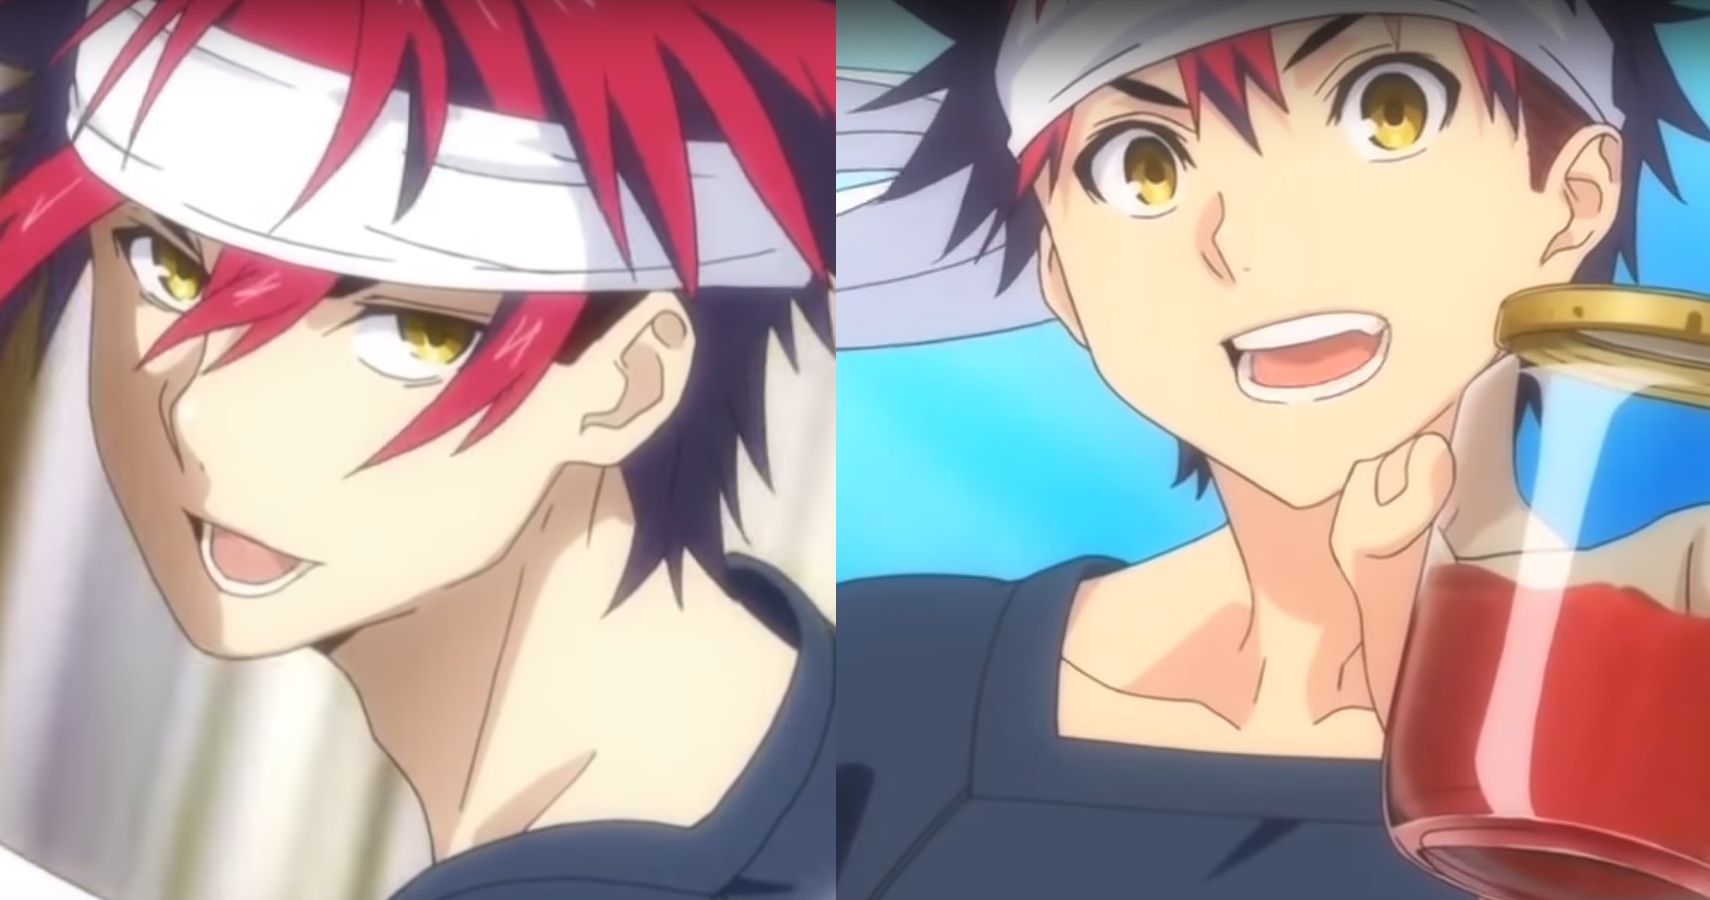 Food Wars: Ranking The Top 15 Hero Chefs From Worst To Best